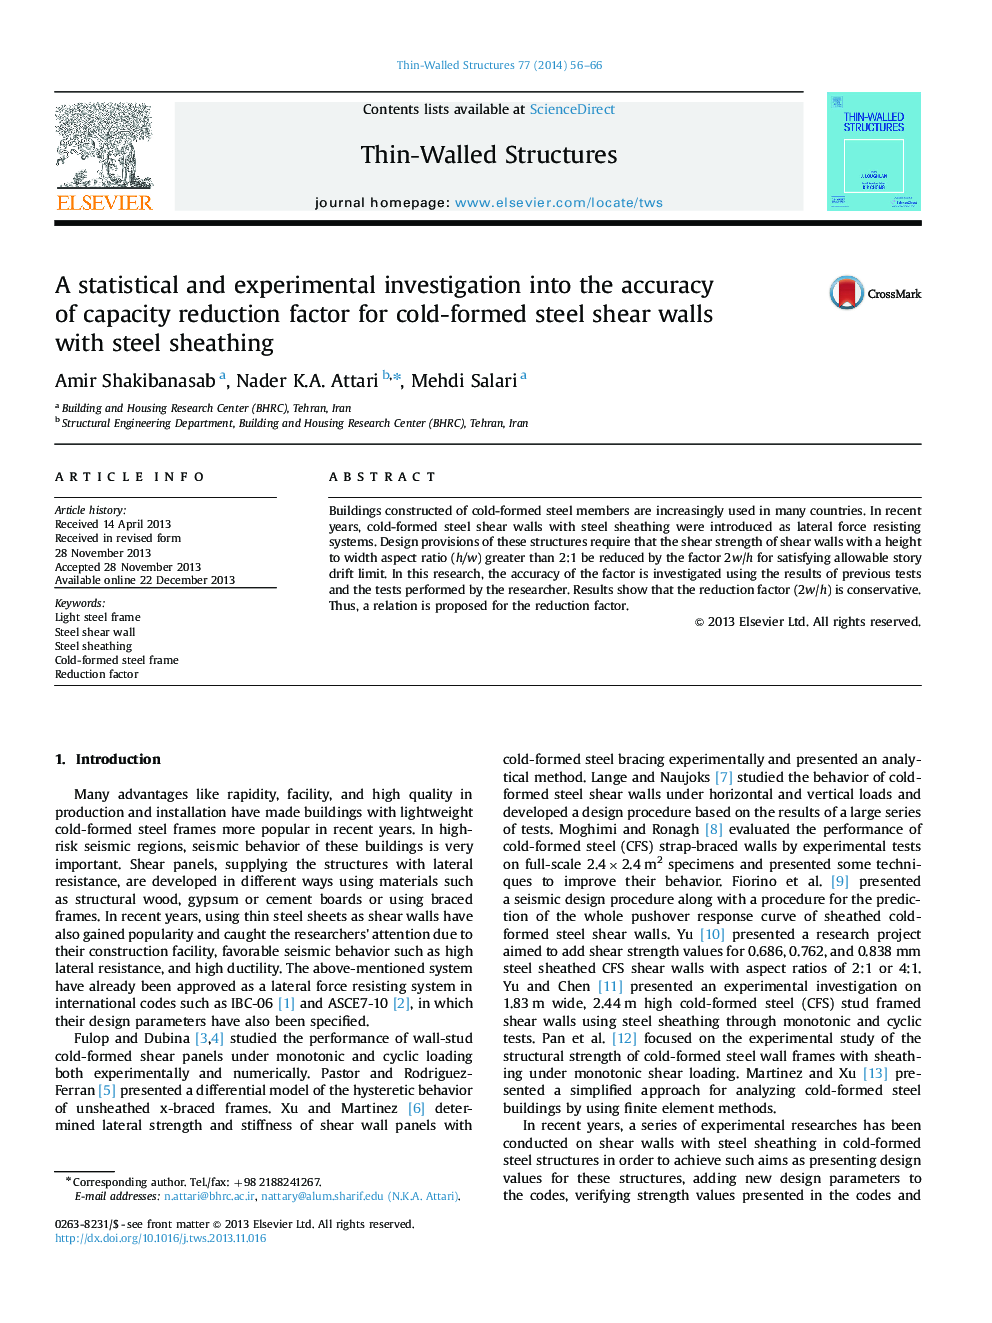 A statistical and experimental investigation into the accuracy of capacity reduction factor for cold-formed steel shear walls with steel sheathing